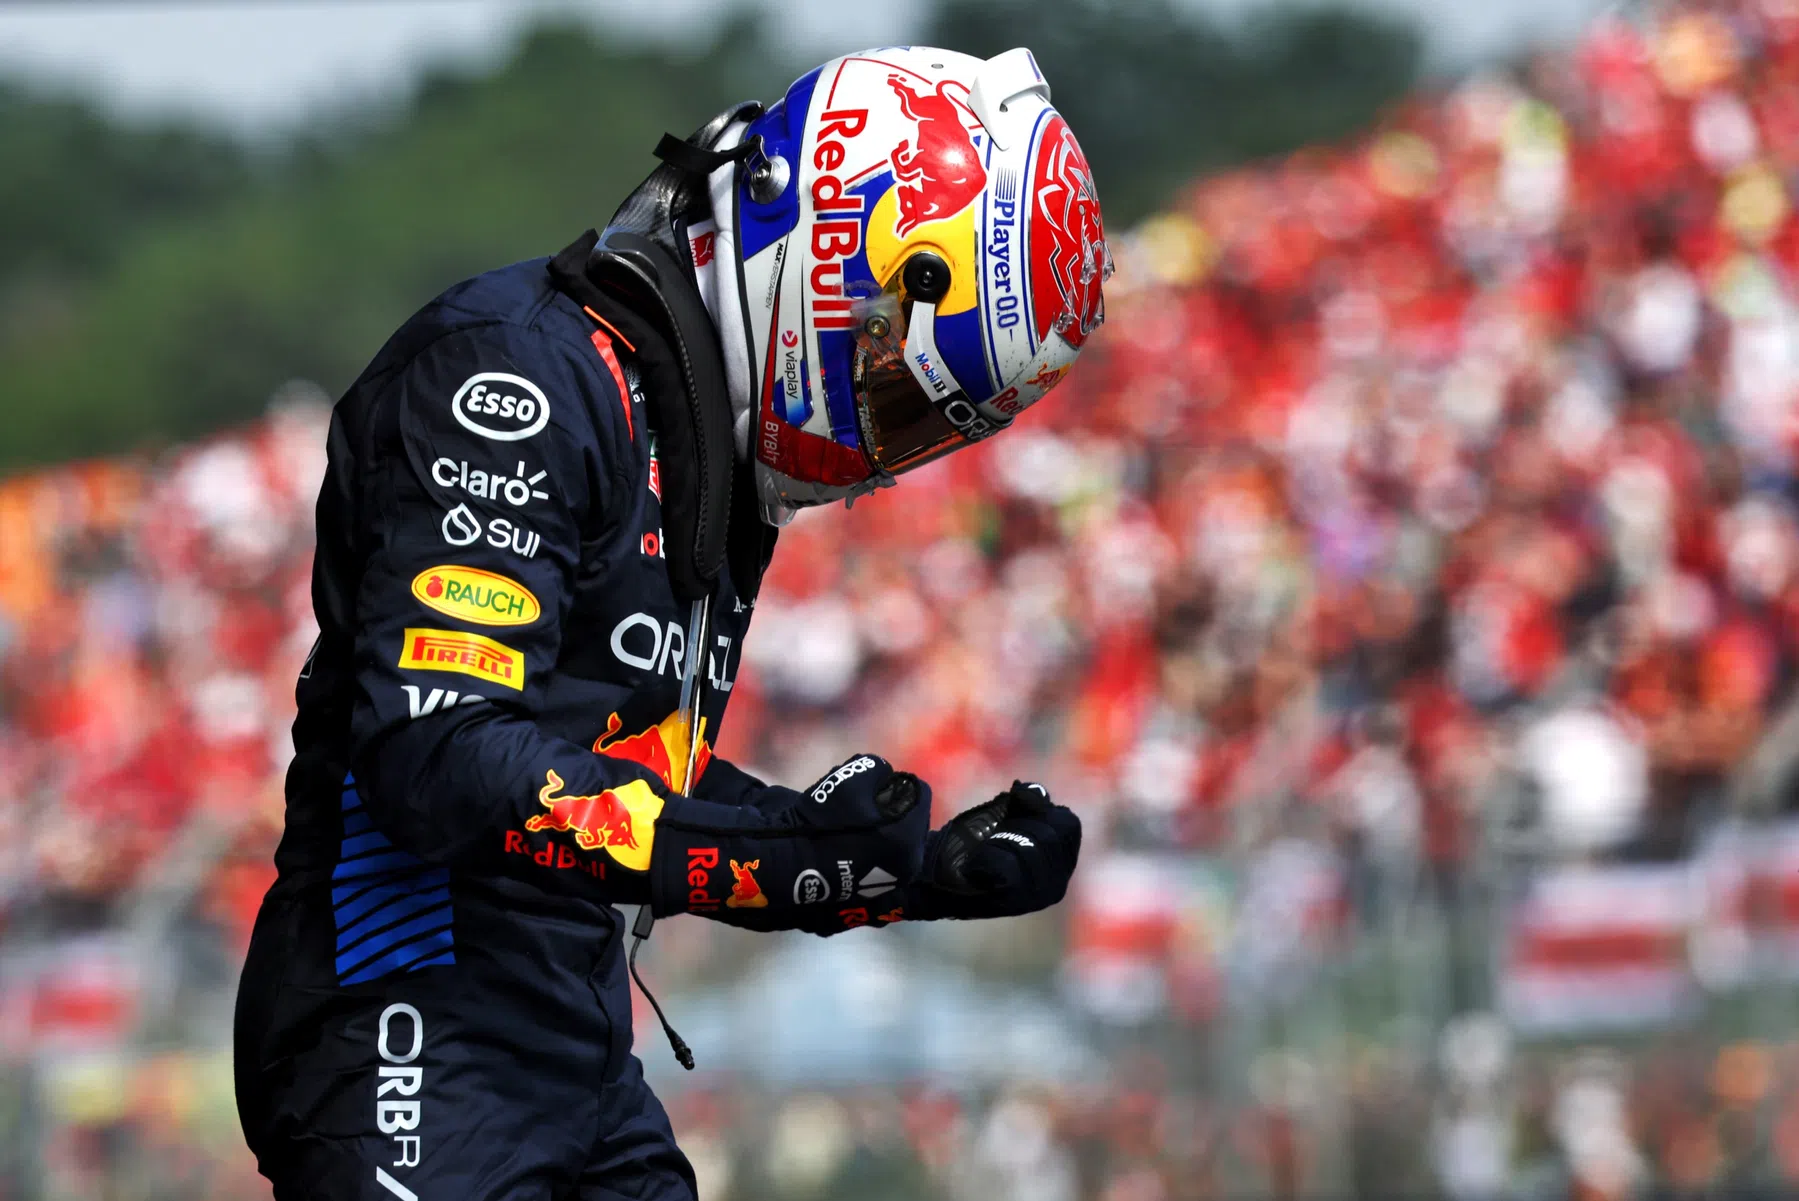 F1 Power Rankings places Verstappen at top again from Norris